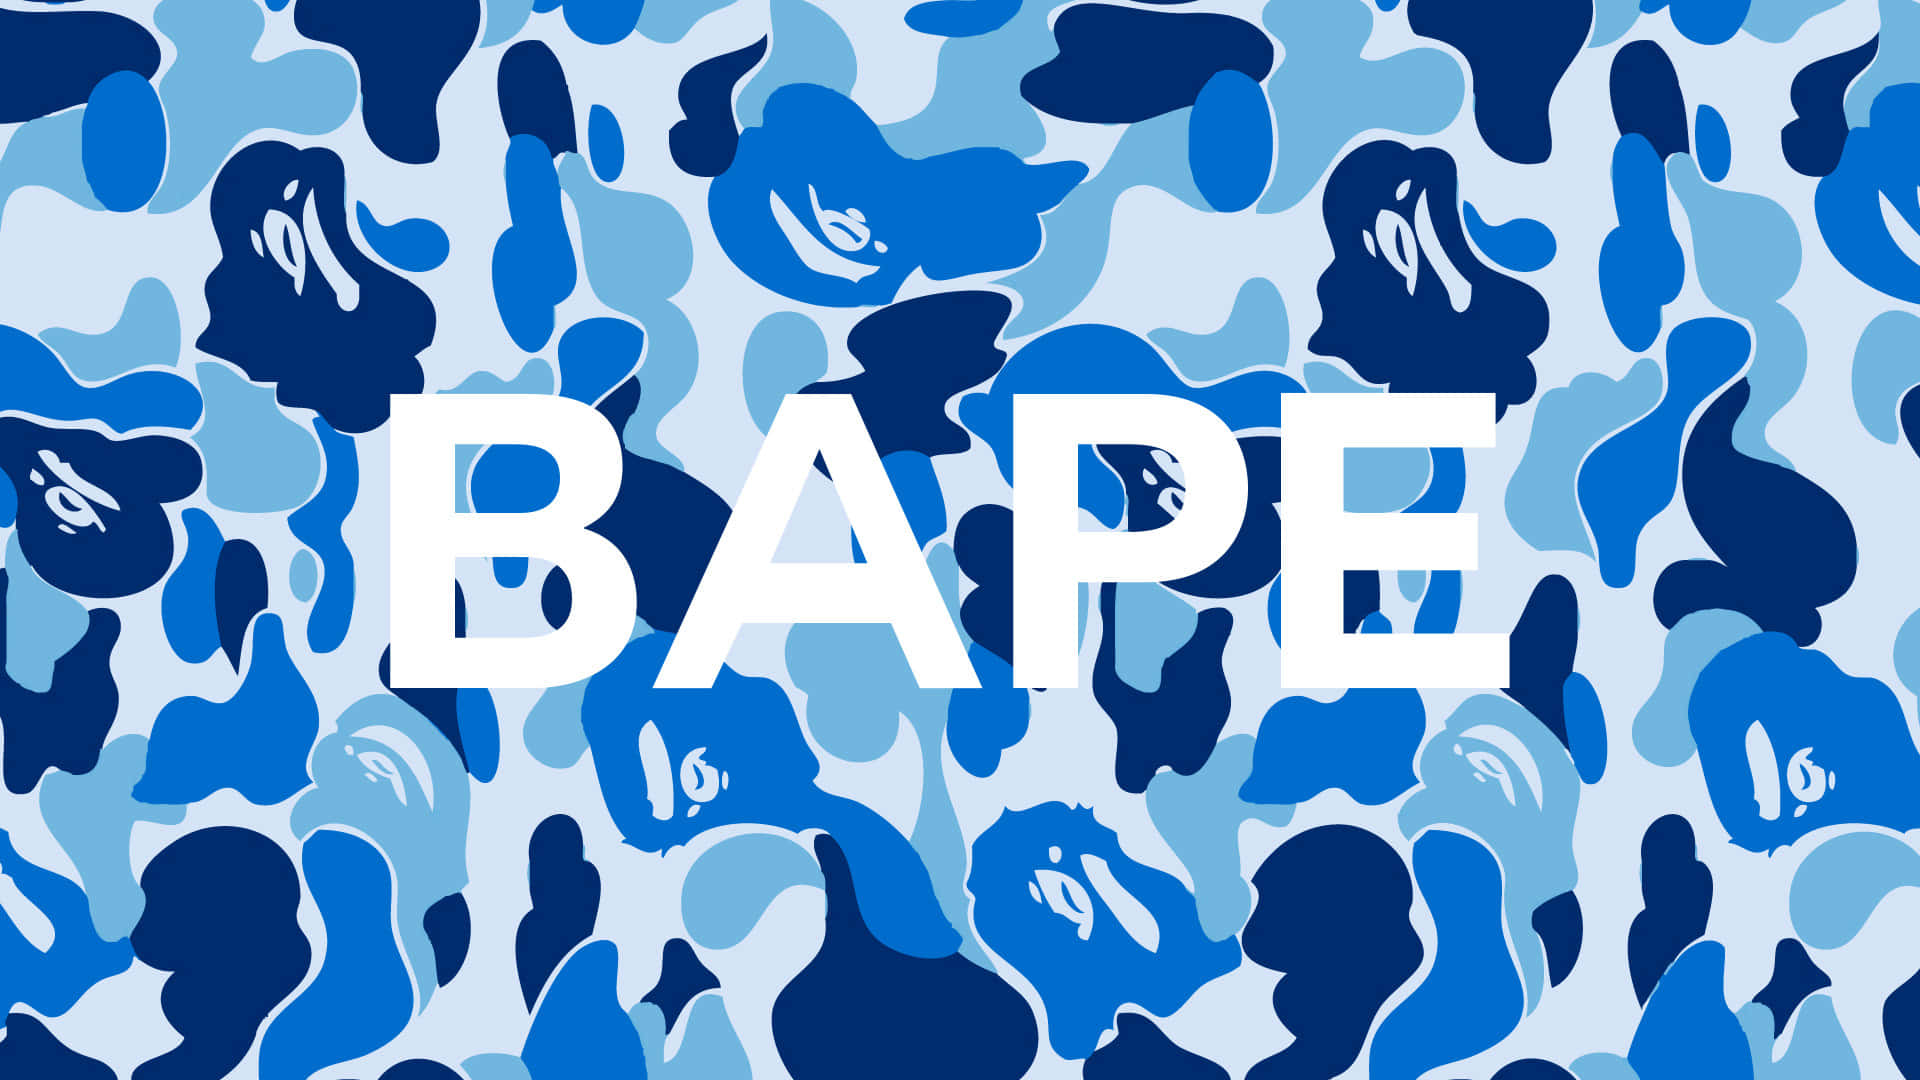 Stay hidden in style with Blue Camo Wallpaper